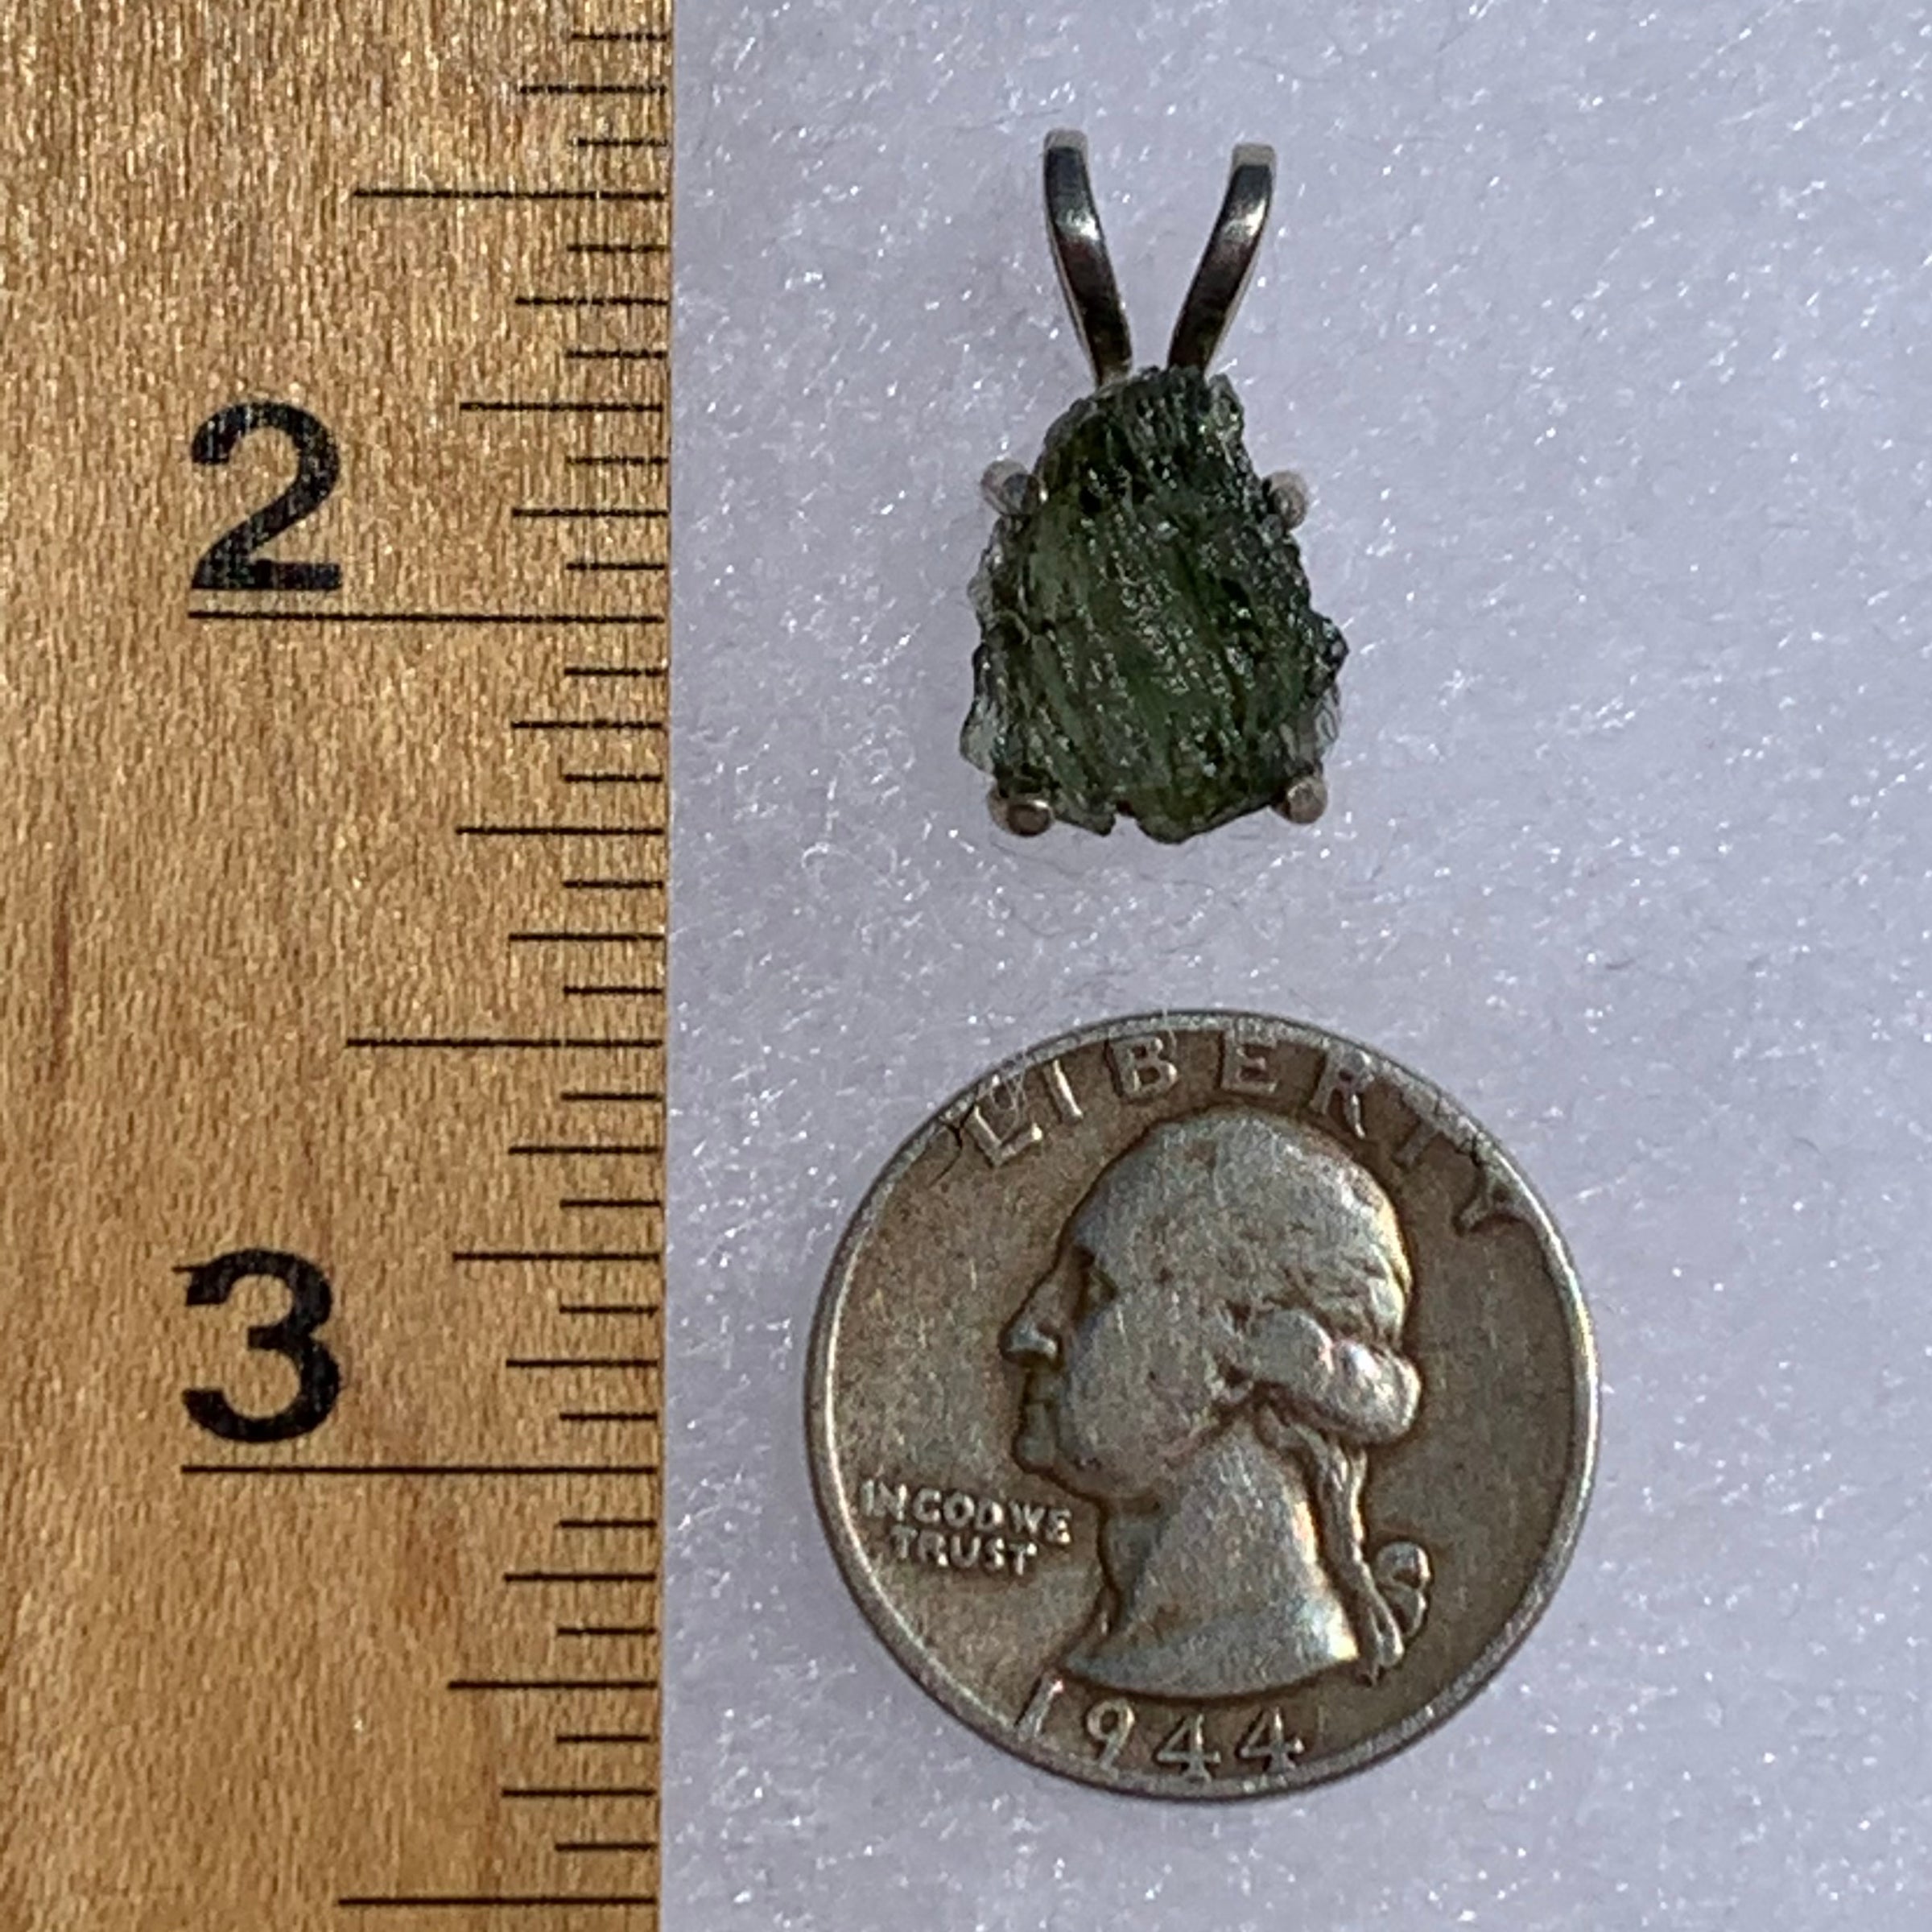 raw moldavite tektite in 4 prong sterling silver basket pendant next to a ruler and a quarter for scale